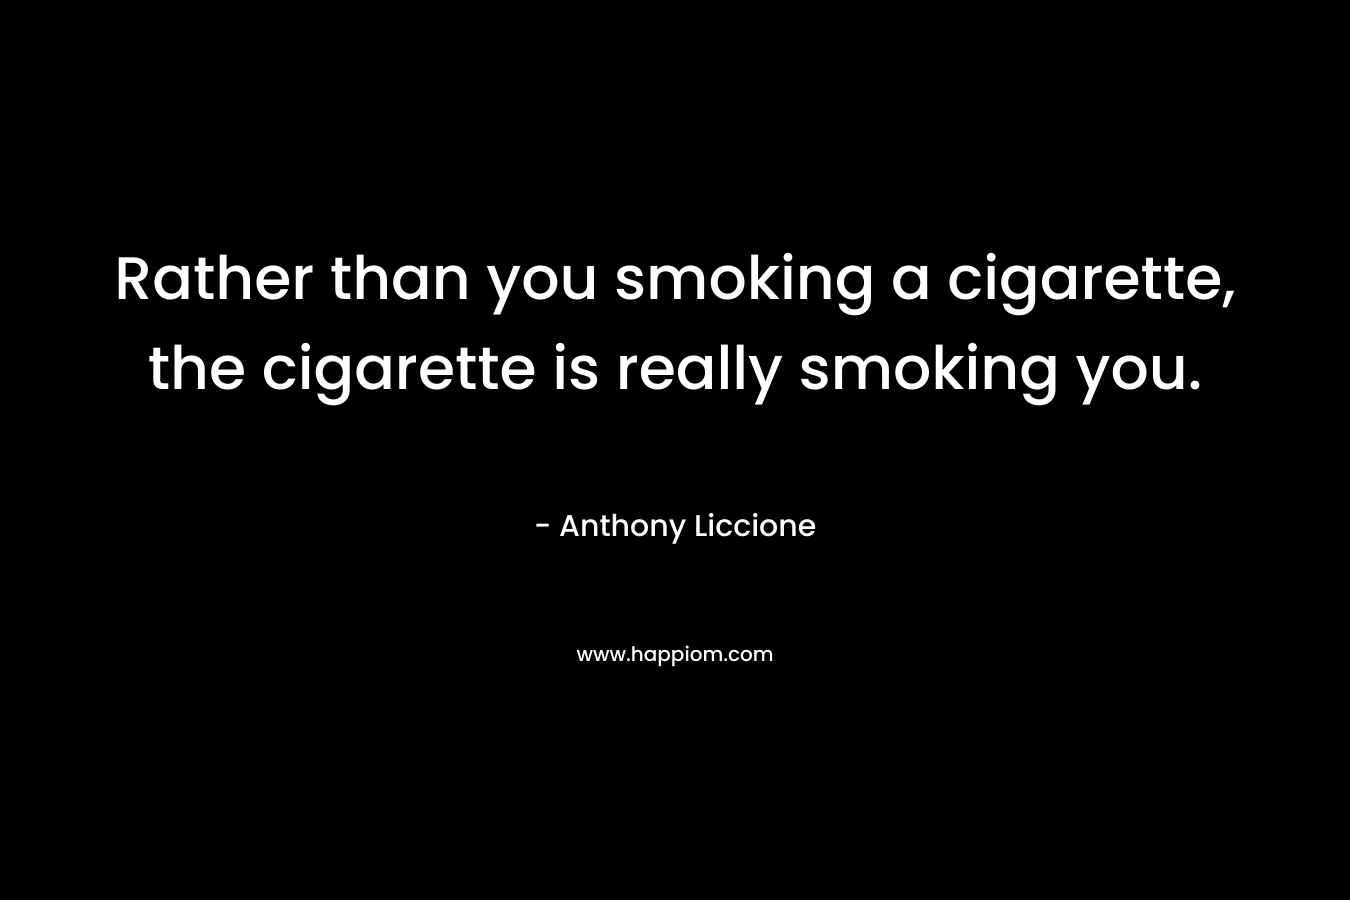 Rather than you smoking a cigarette, the cigarette is really smoking you. – Anthony Liccione